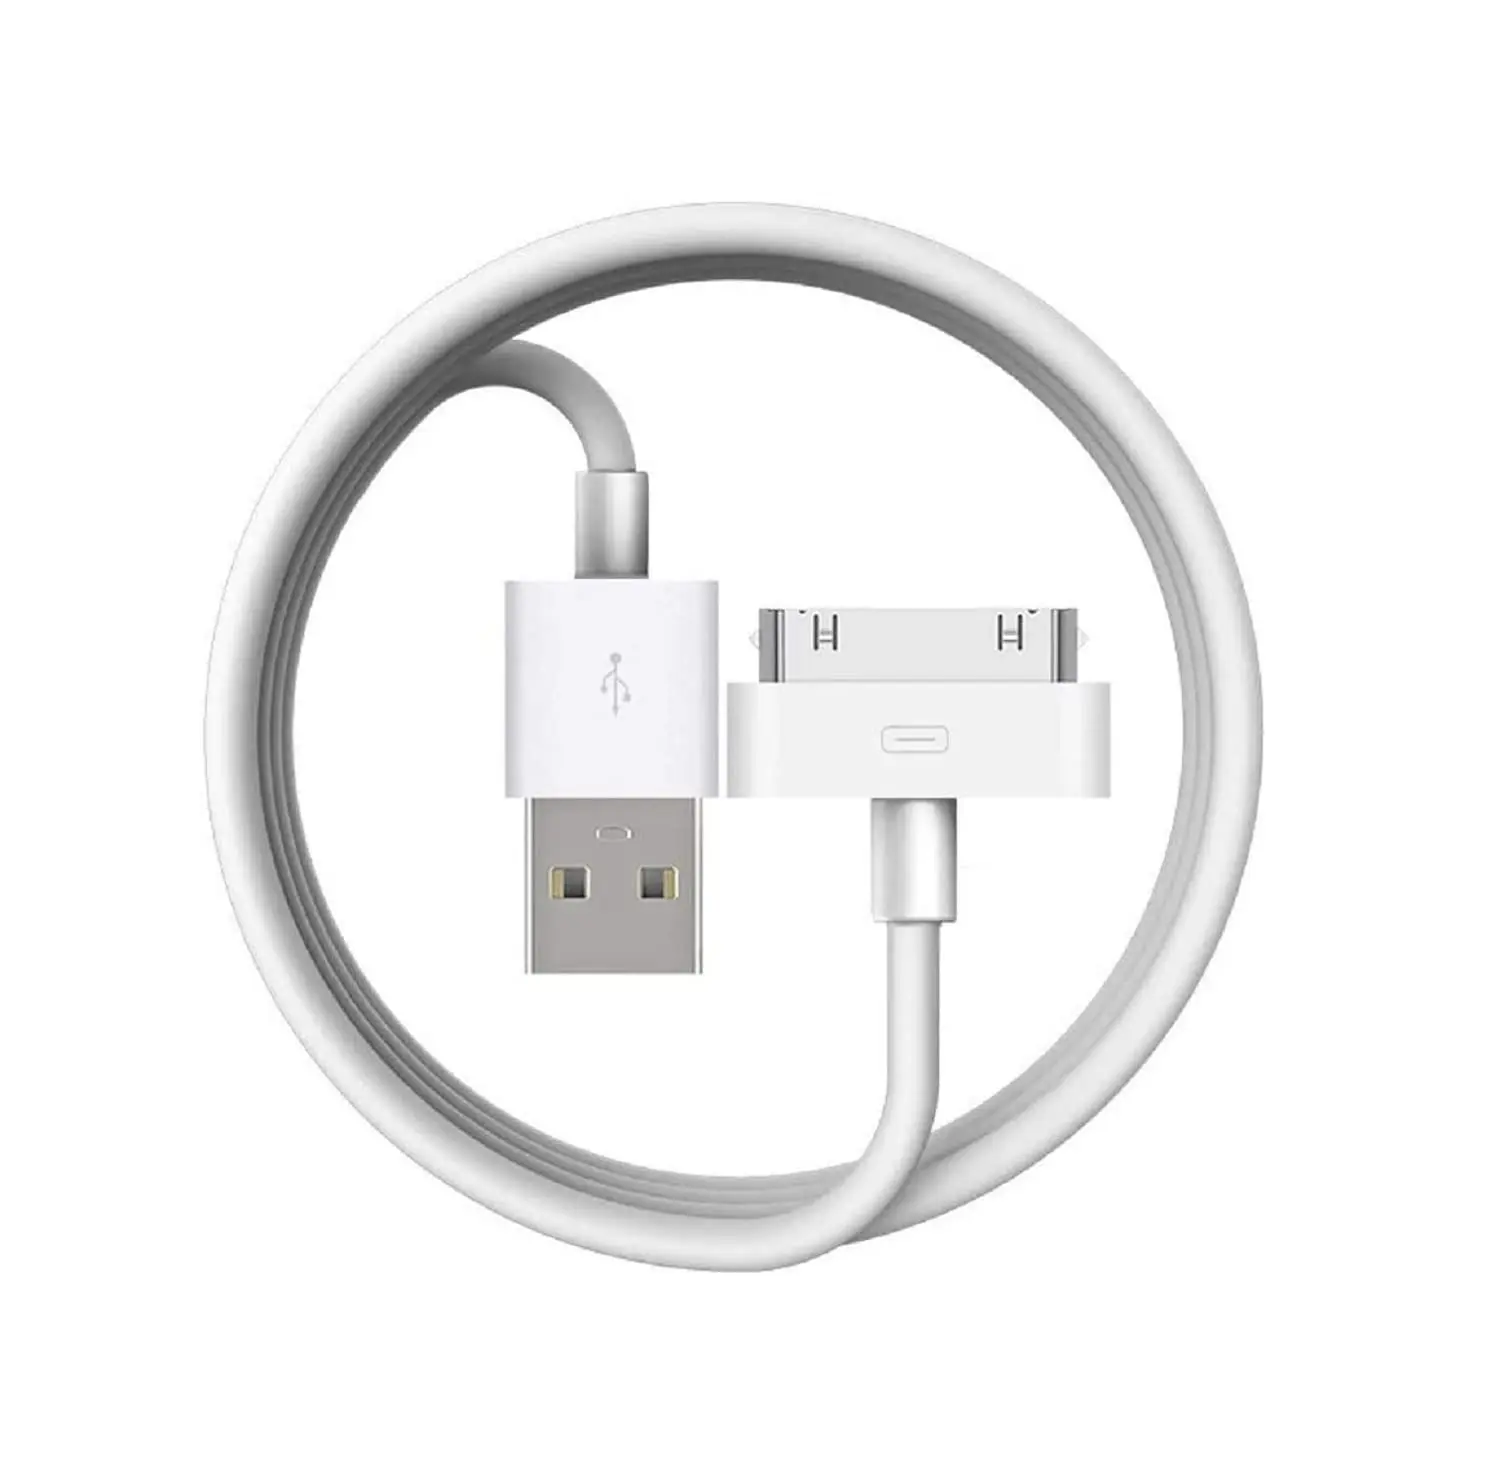 

30Pin to USB Sync Data and Charging Cable for iPhone 4/ 4s iPhone 3G/3Gs iPad 3/2/ 1 iPod Classic iPod Touch iPod Nano